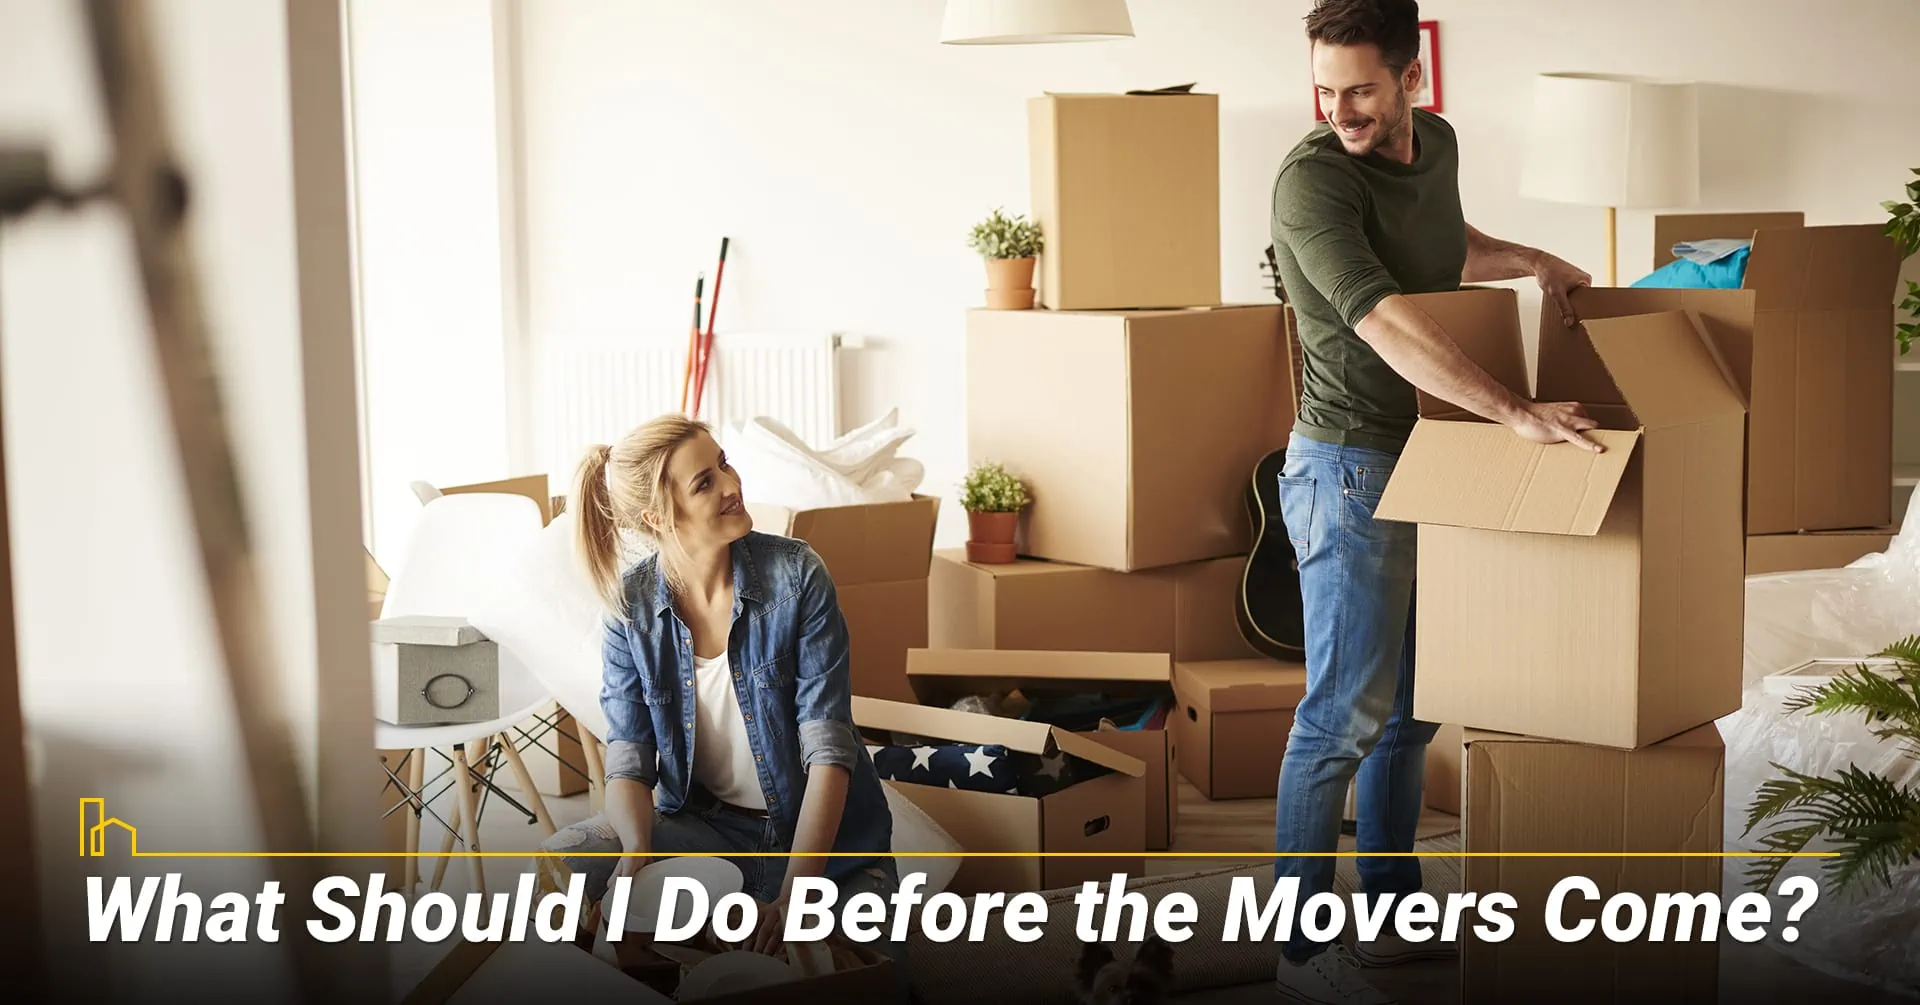 What Should I Look for in a Professional Moving Company?